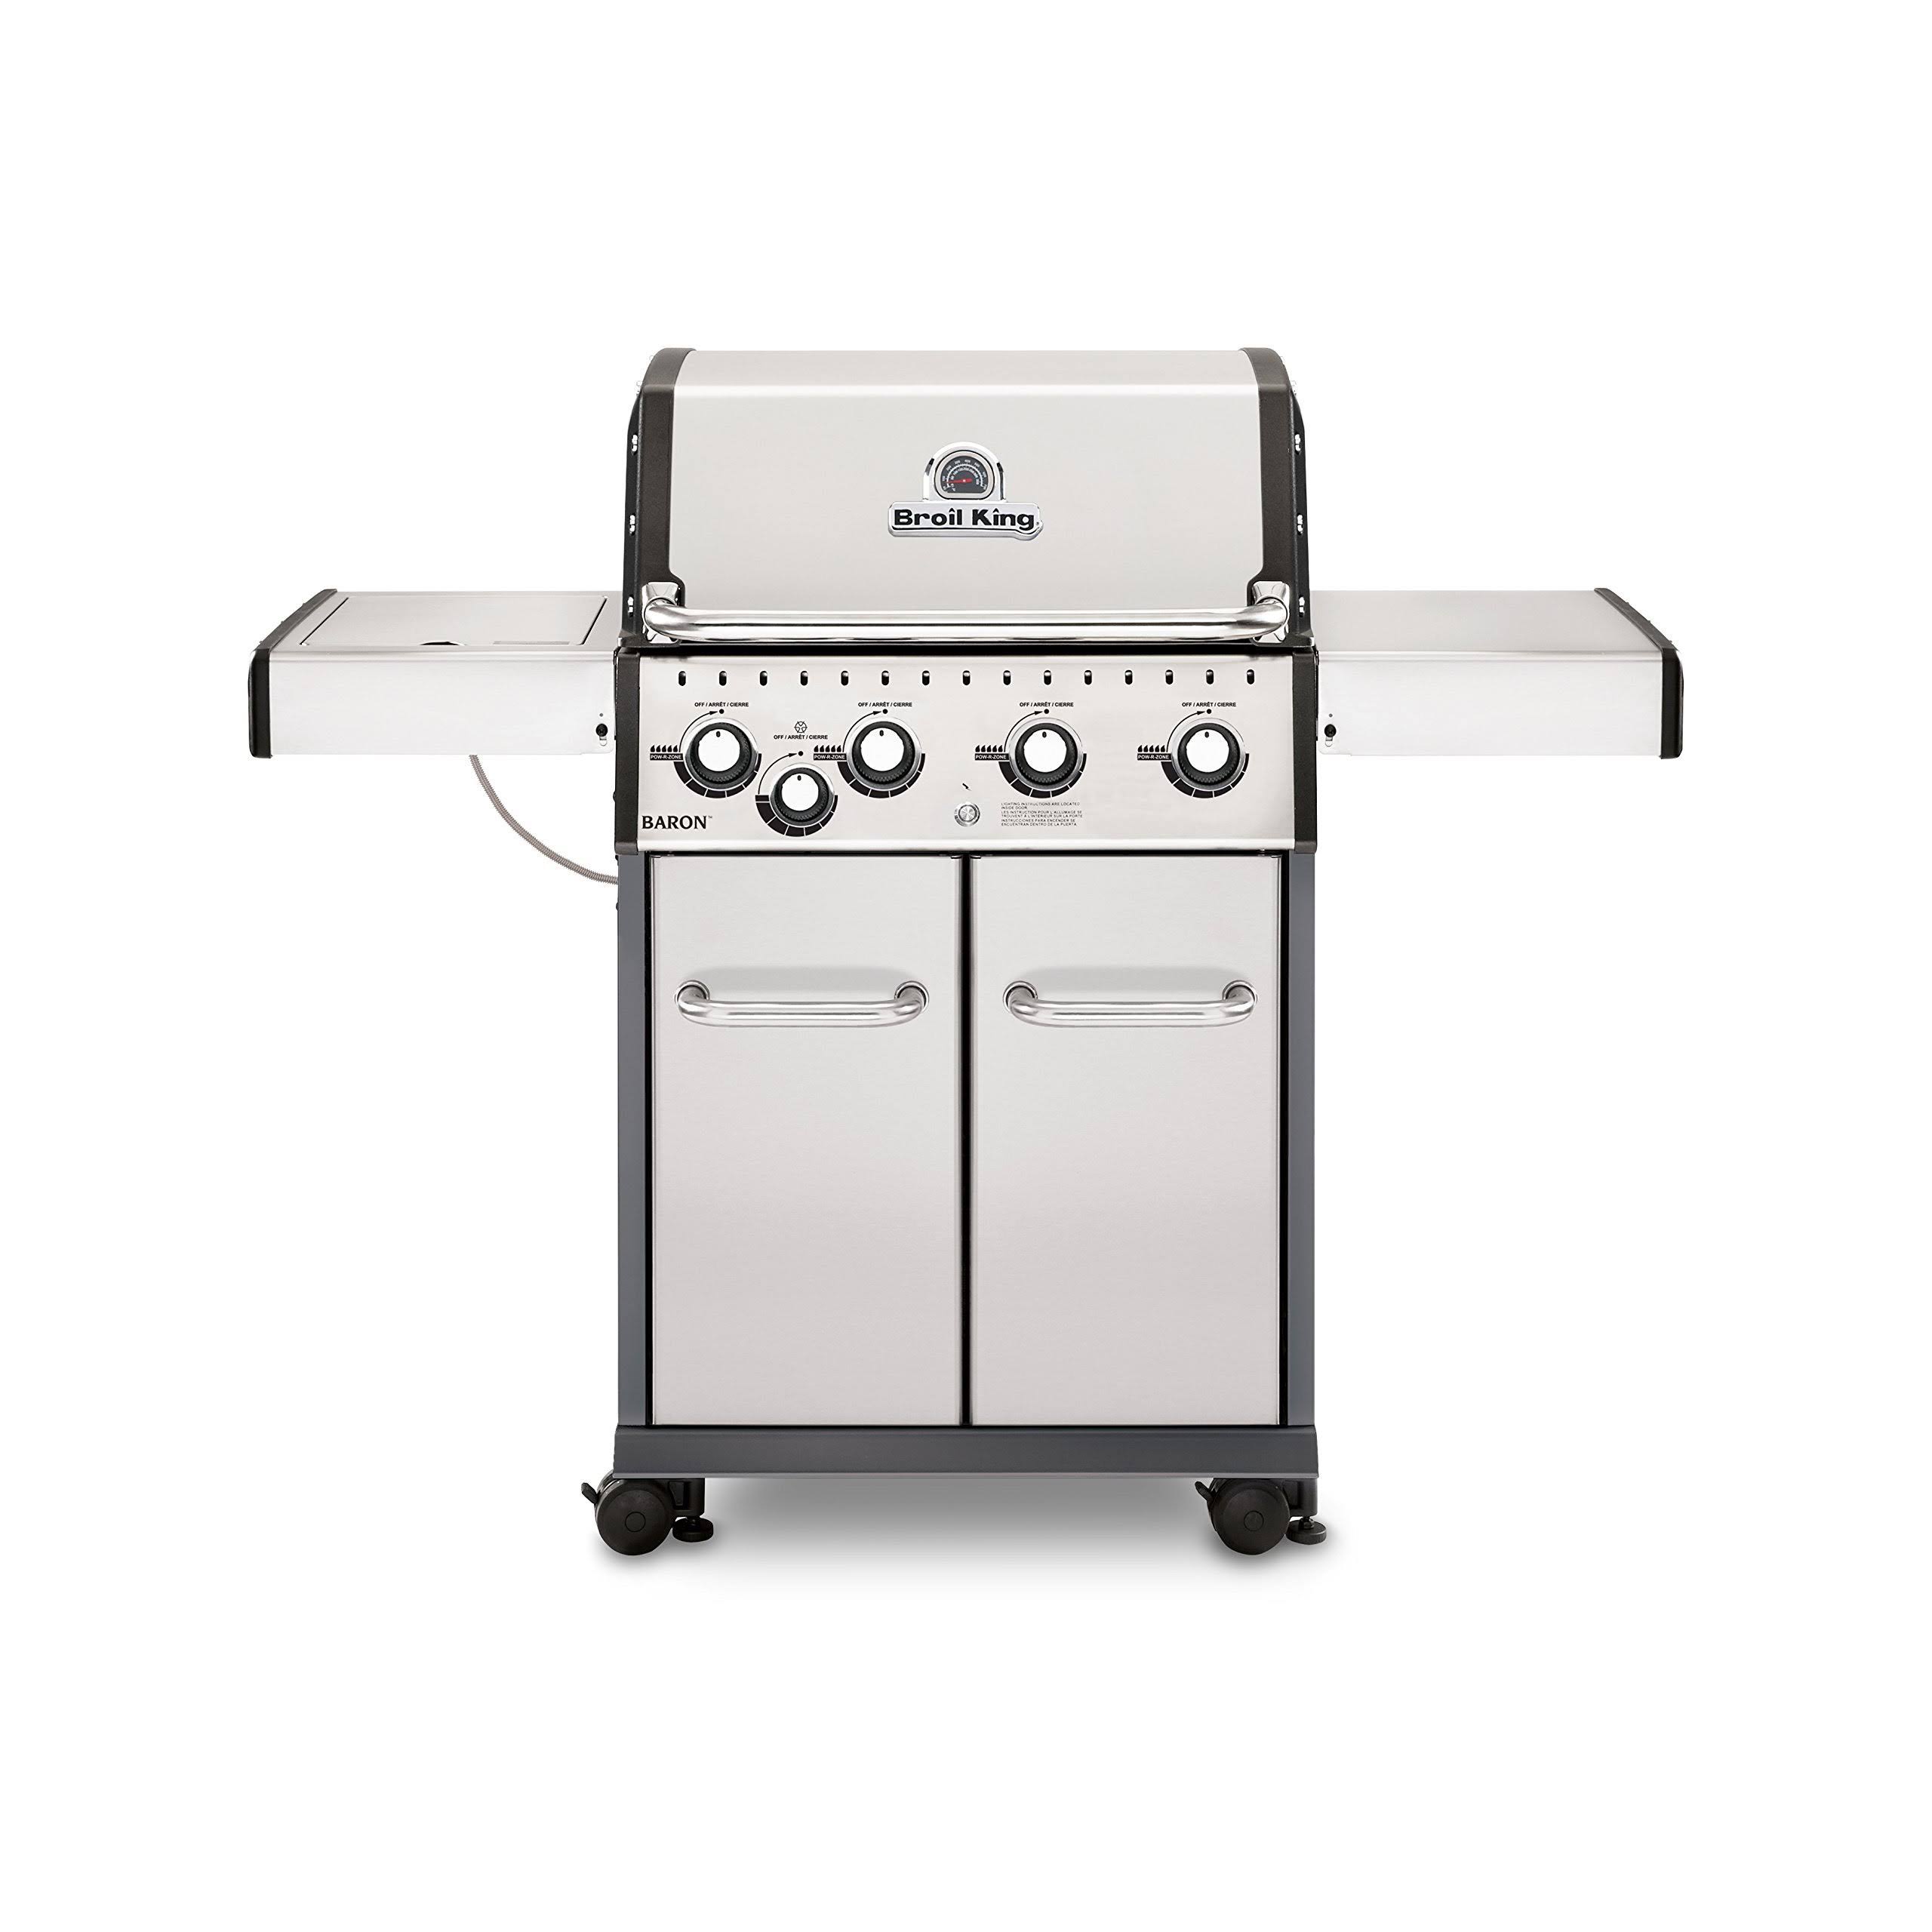 Broil King Baron Liquid Propane Gas Grill - Stainless Steel